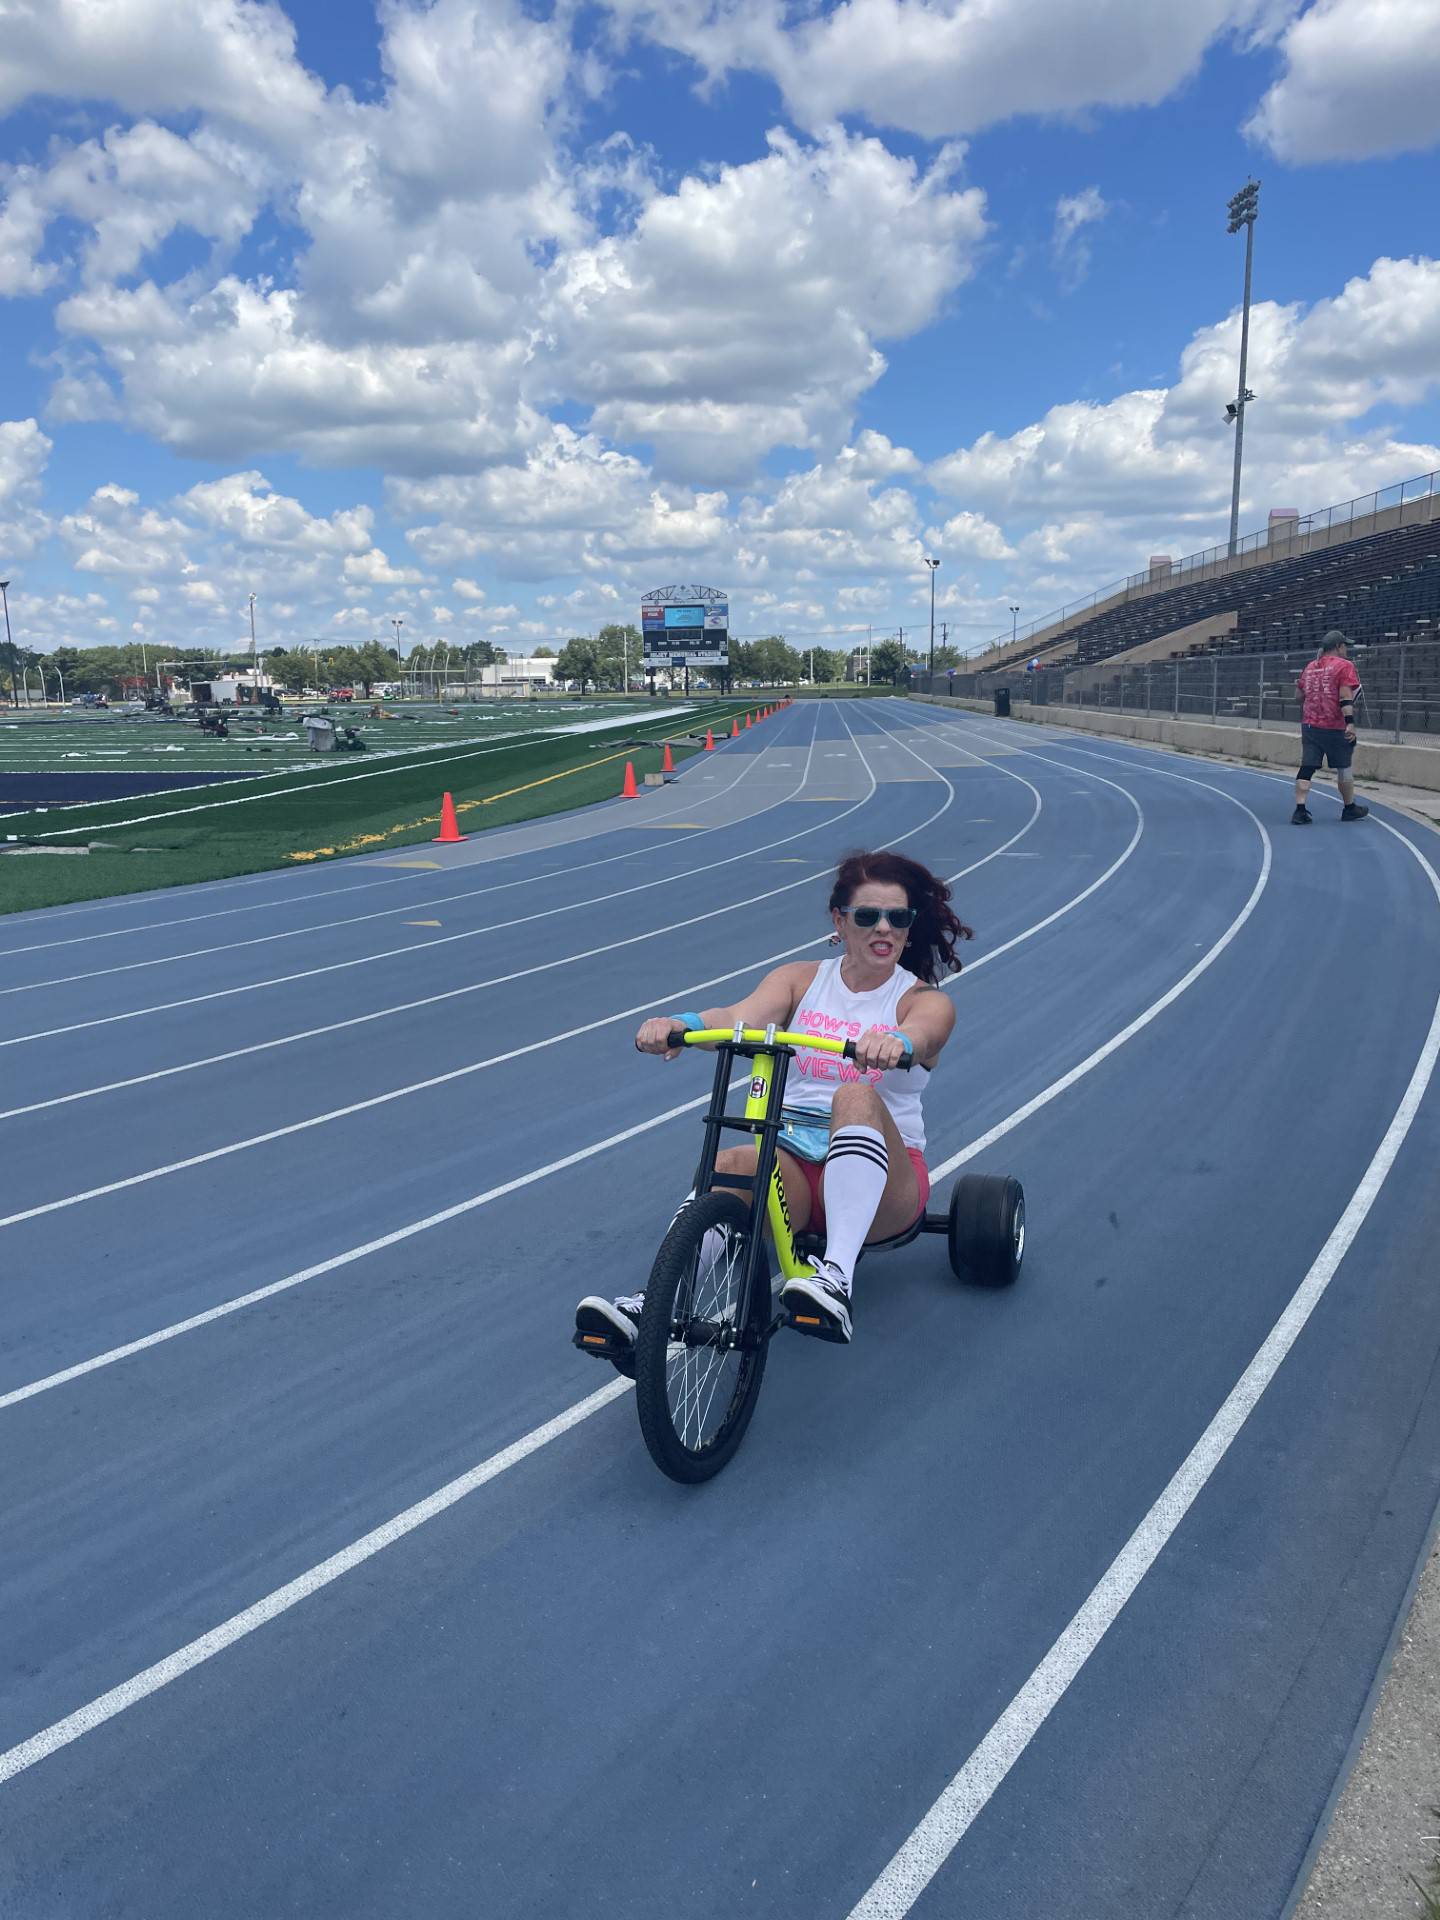 United Cerebral Palsy-Center for Disability Services in Joliet is hosting its third annual Great American Big Wheel Race on July 22 at Joliet Memorial Stadium. Pictured is Kelly Wujeck representing Easterseals Joliet Region during a previous event.